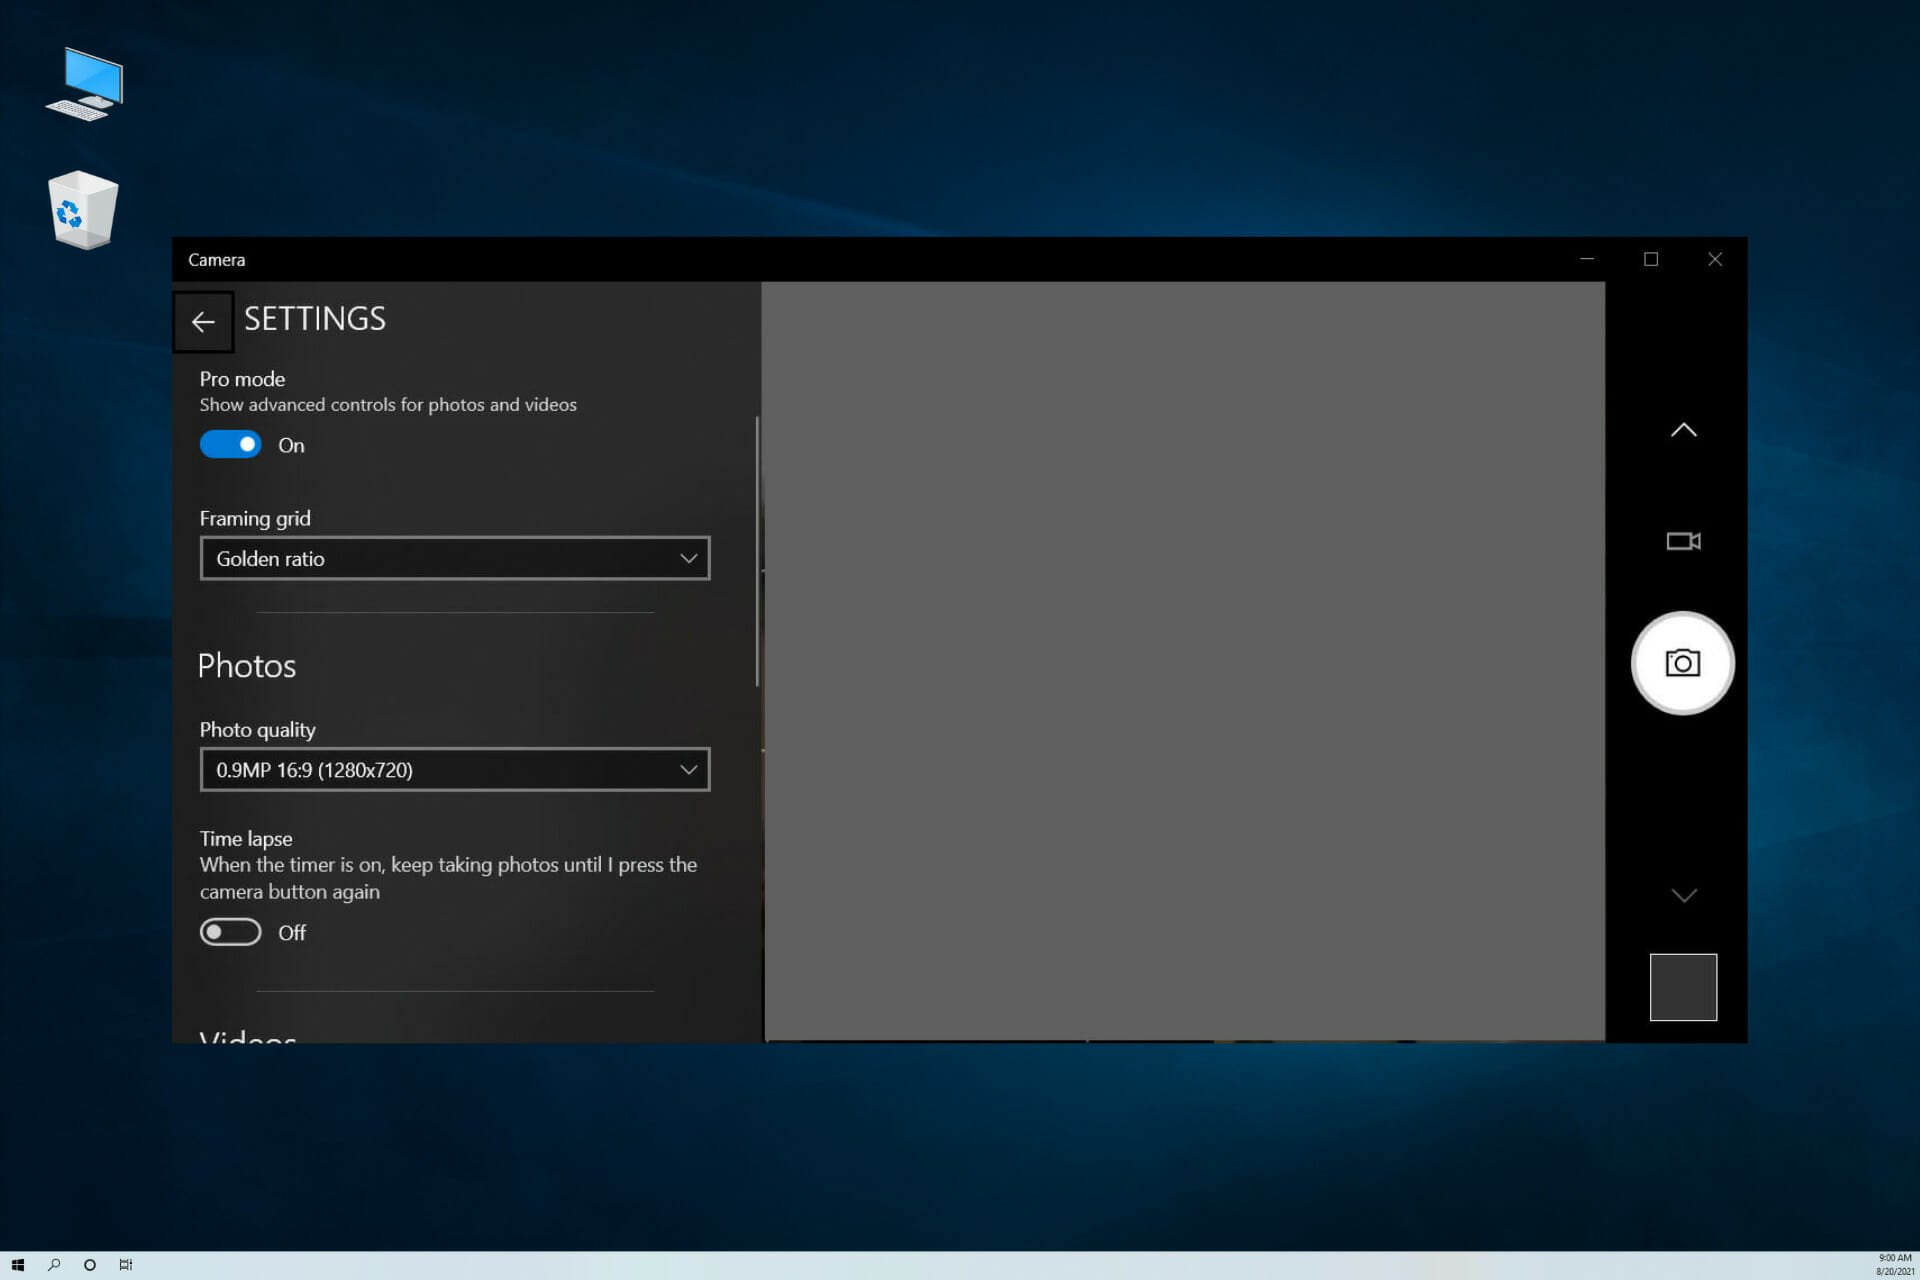 How to access camera settings in Windows 10